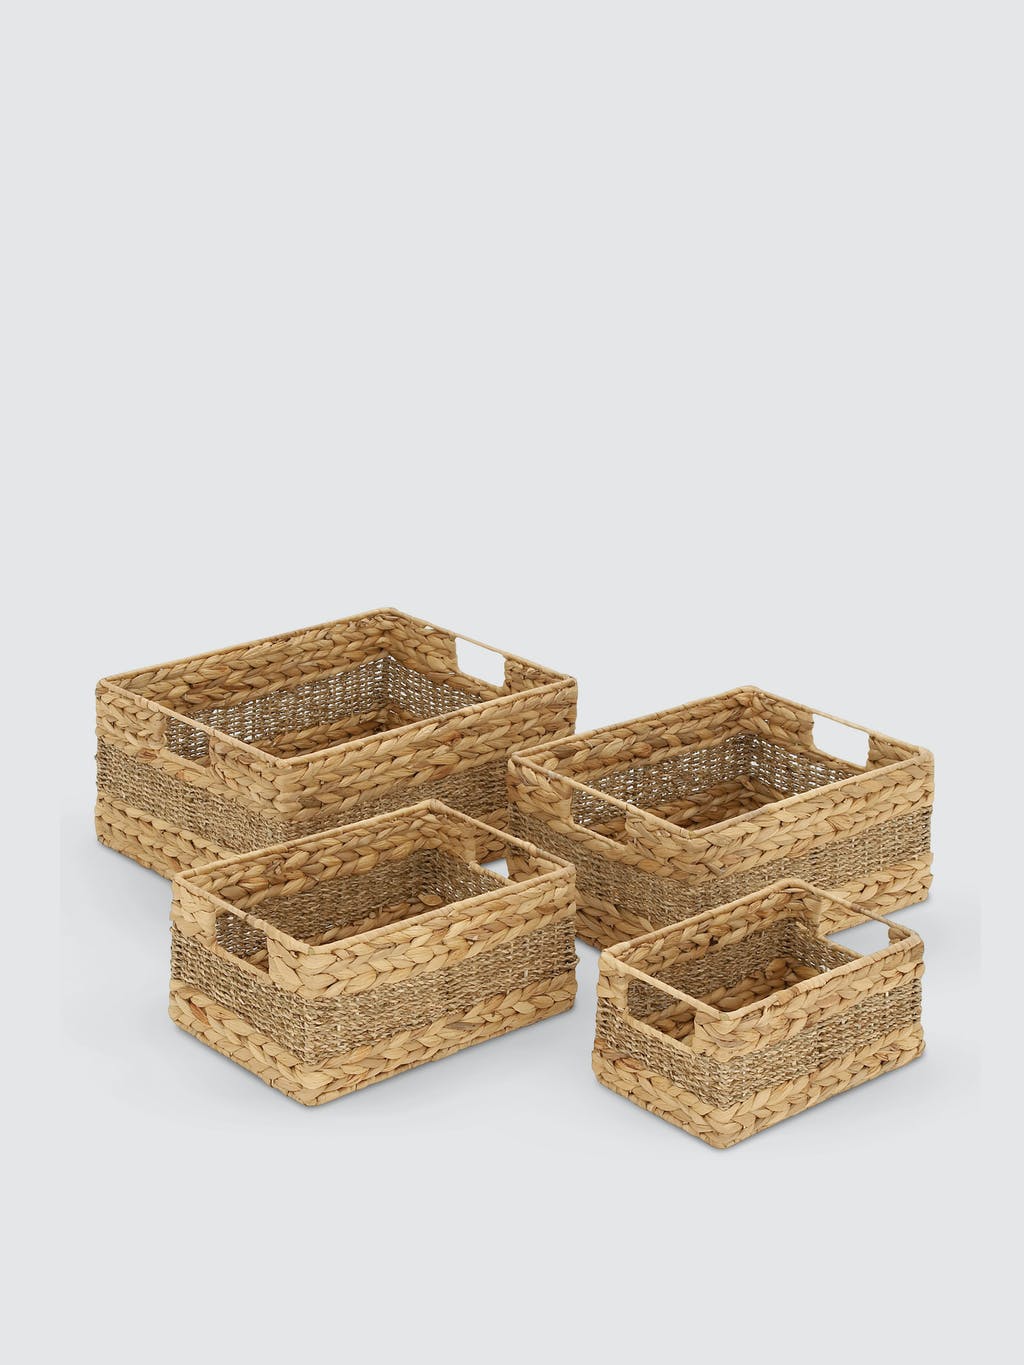 Braided Rectangle Seagrass Baskets - Set Of 4